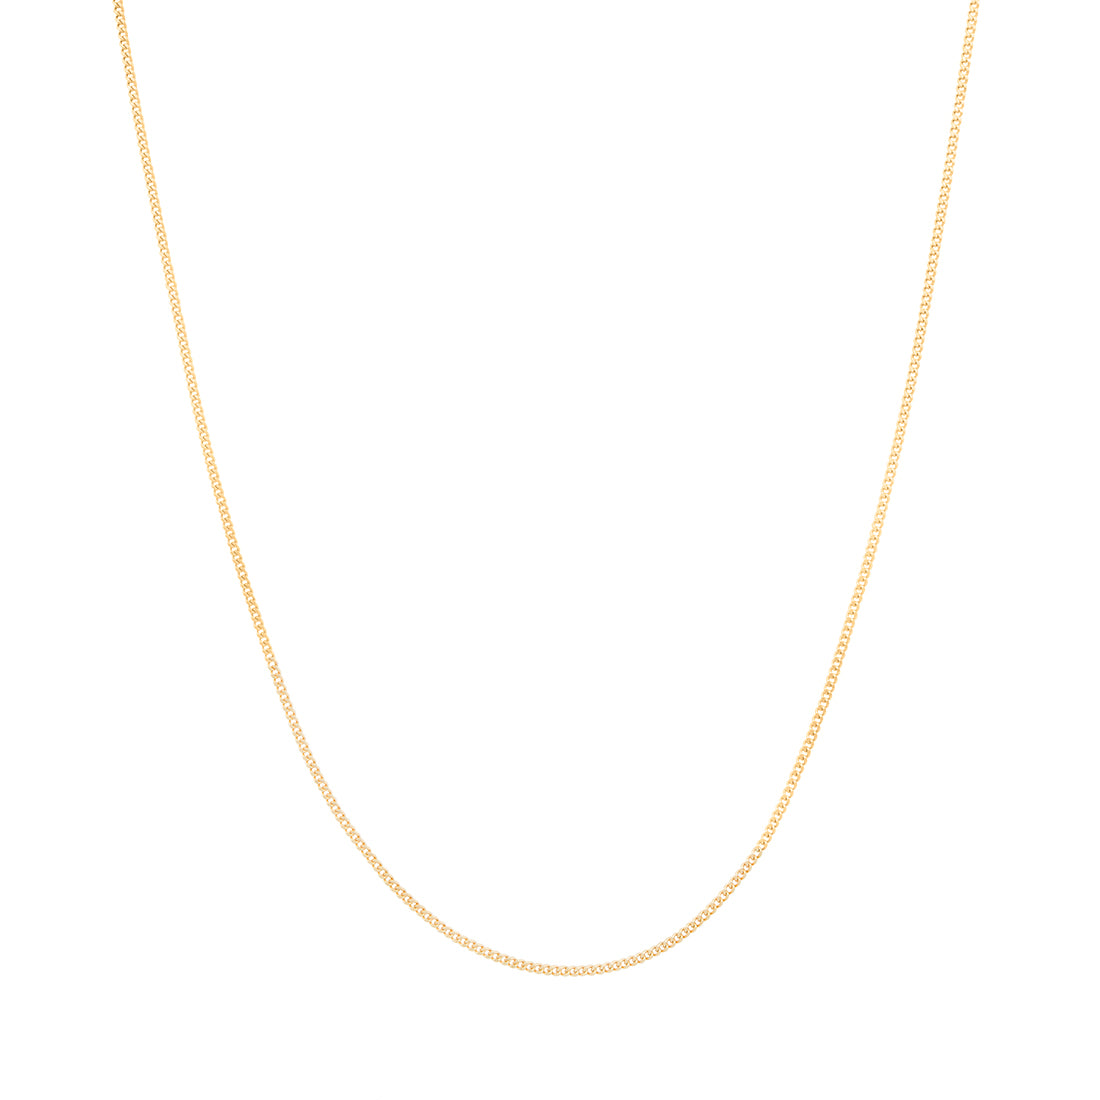 18K　イエローゴールド　Curb Chain　カーブチェーン　Necklace　ネックレス